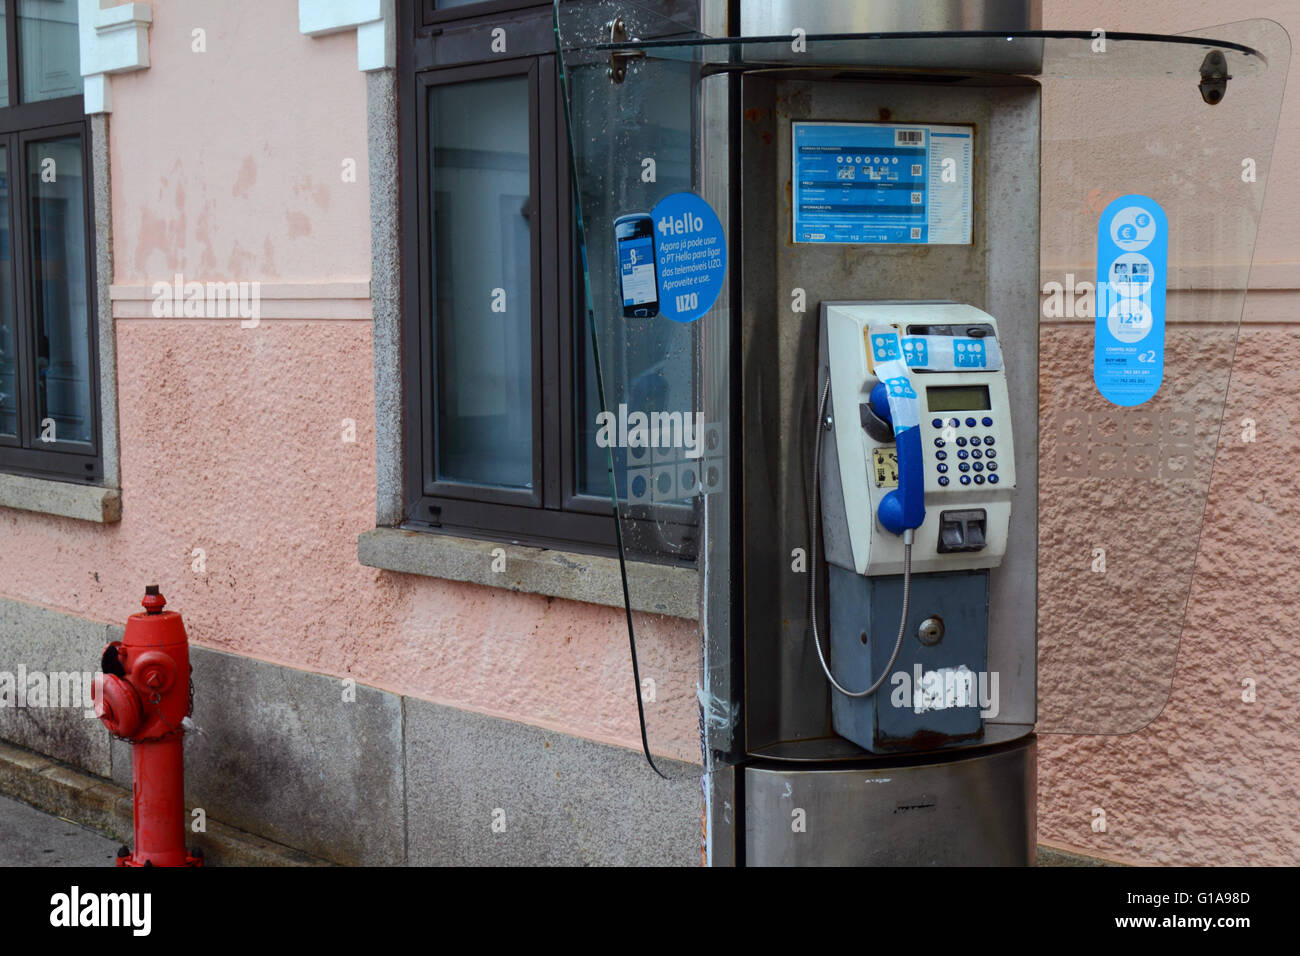 Out of order public payphone in street, Vila Praia de Ancora , Minho Province, northern Portugal Stock Photo